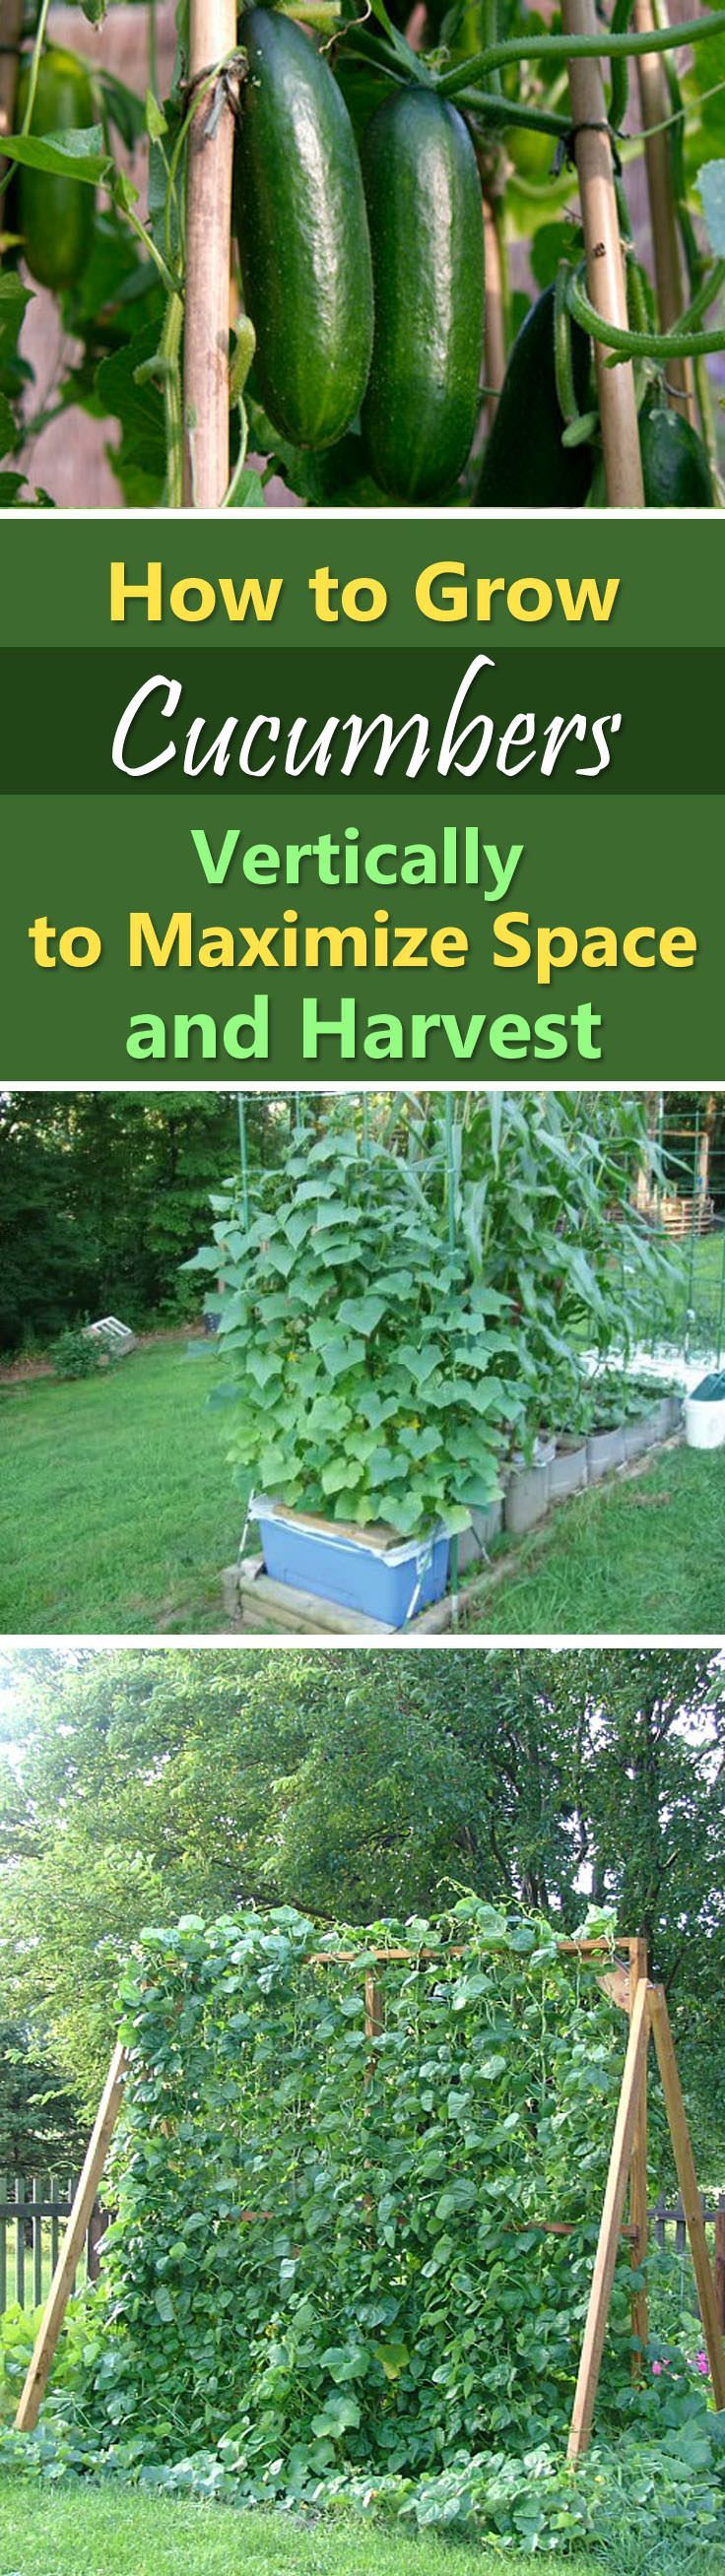 Growing Cucumbers Vertically in Small Gardens & Containers